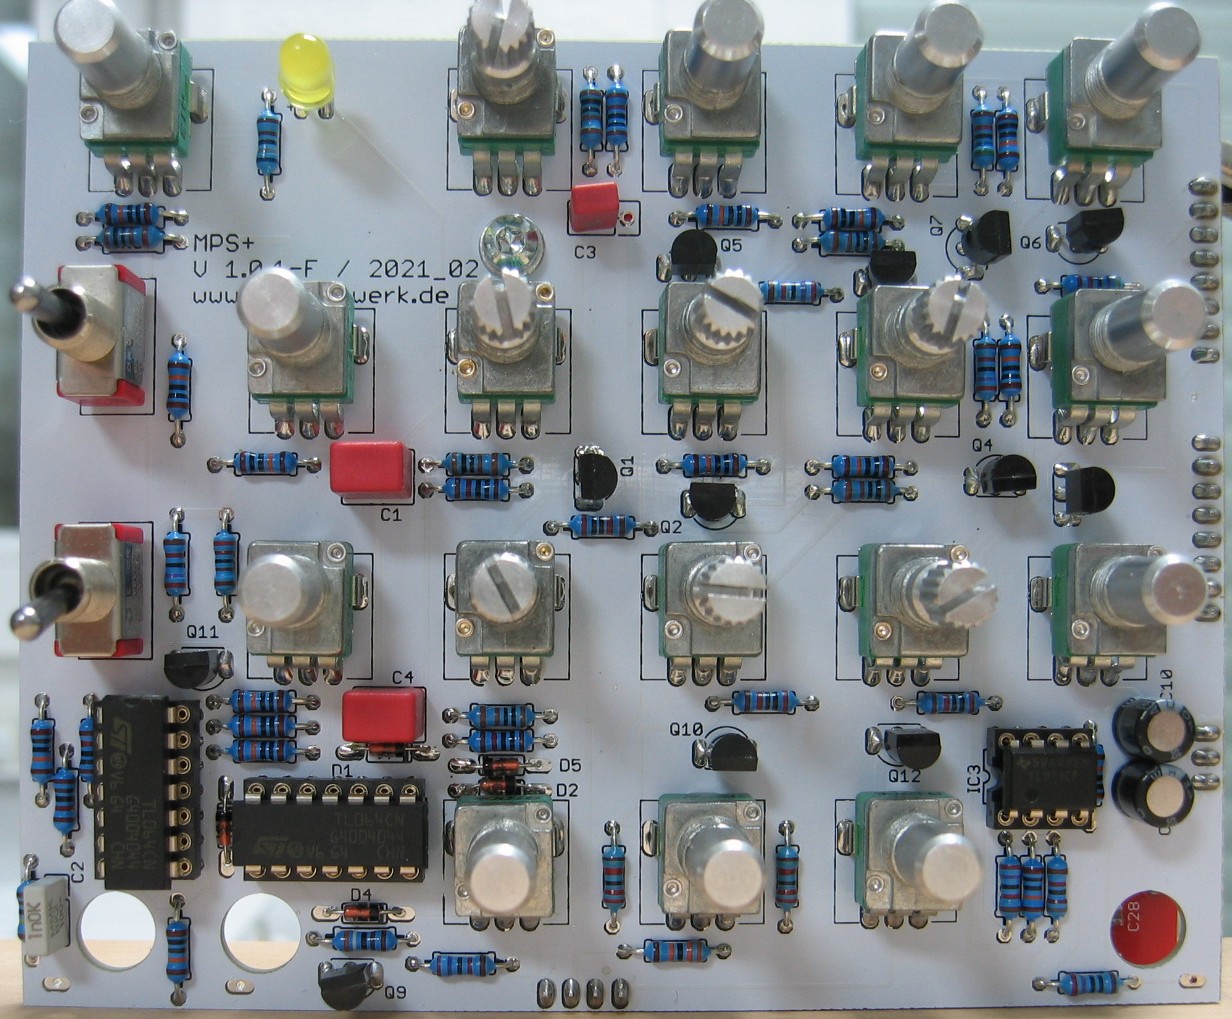 Thomas Henry's MPS populated control PCB